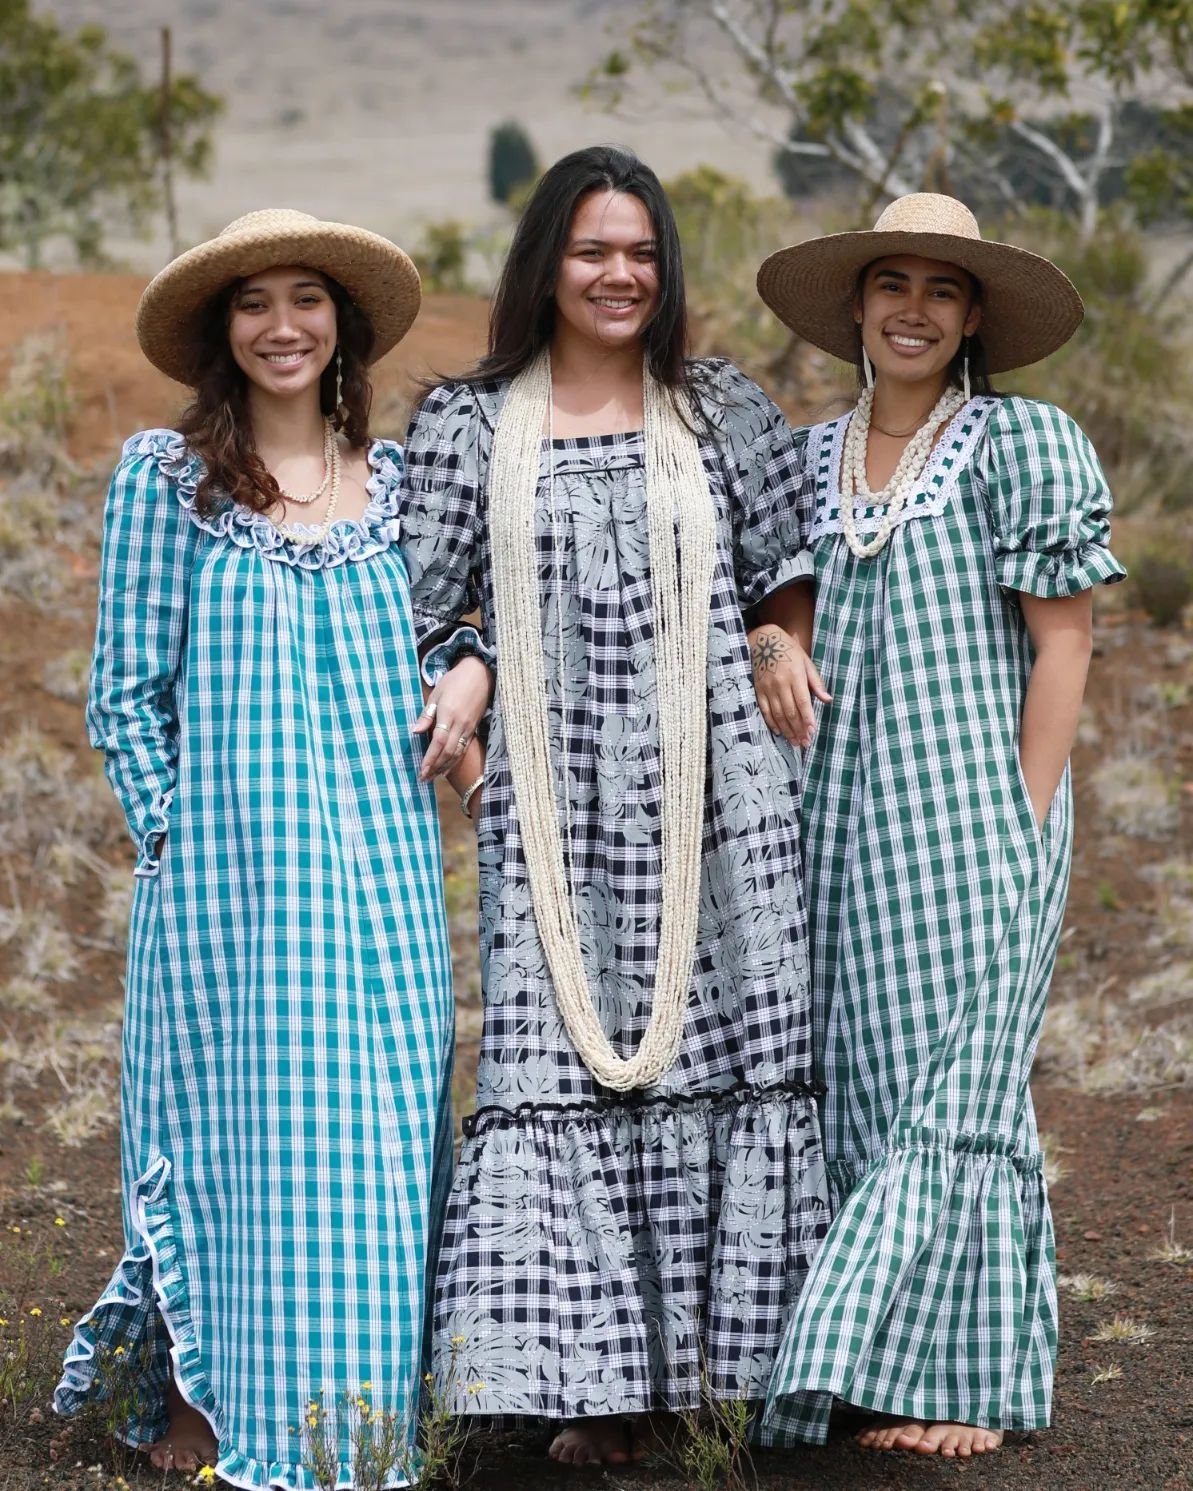 Hawaiian Muumuu Vintage Palaka Style Dress.

These design is great for a lei day festival, wedding, family reunion, and many other events where you want to display your appreciation for Hawaiian culture. You are sure to feel like a true representatio